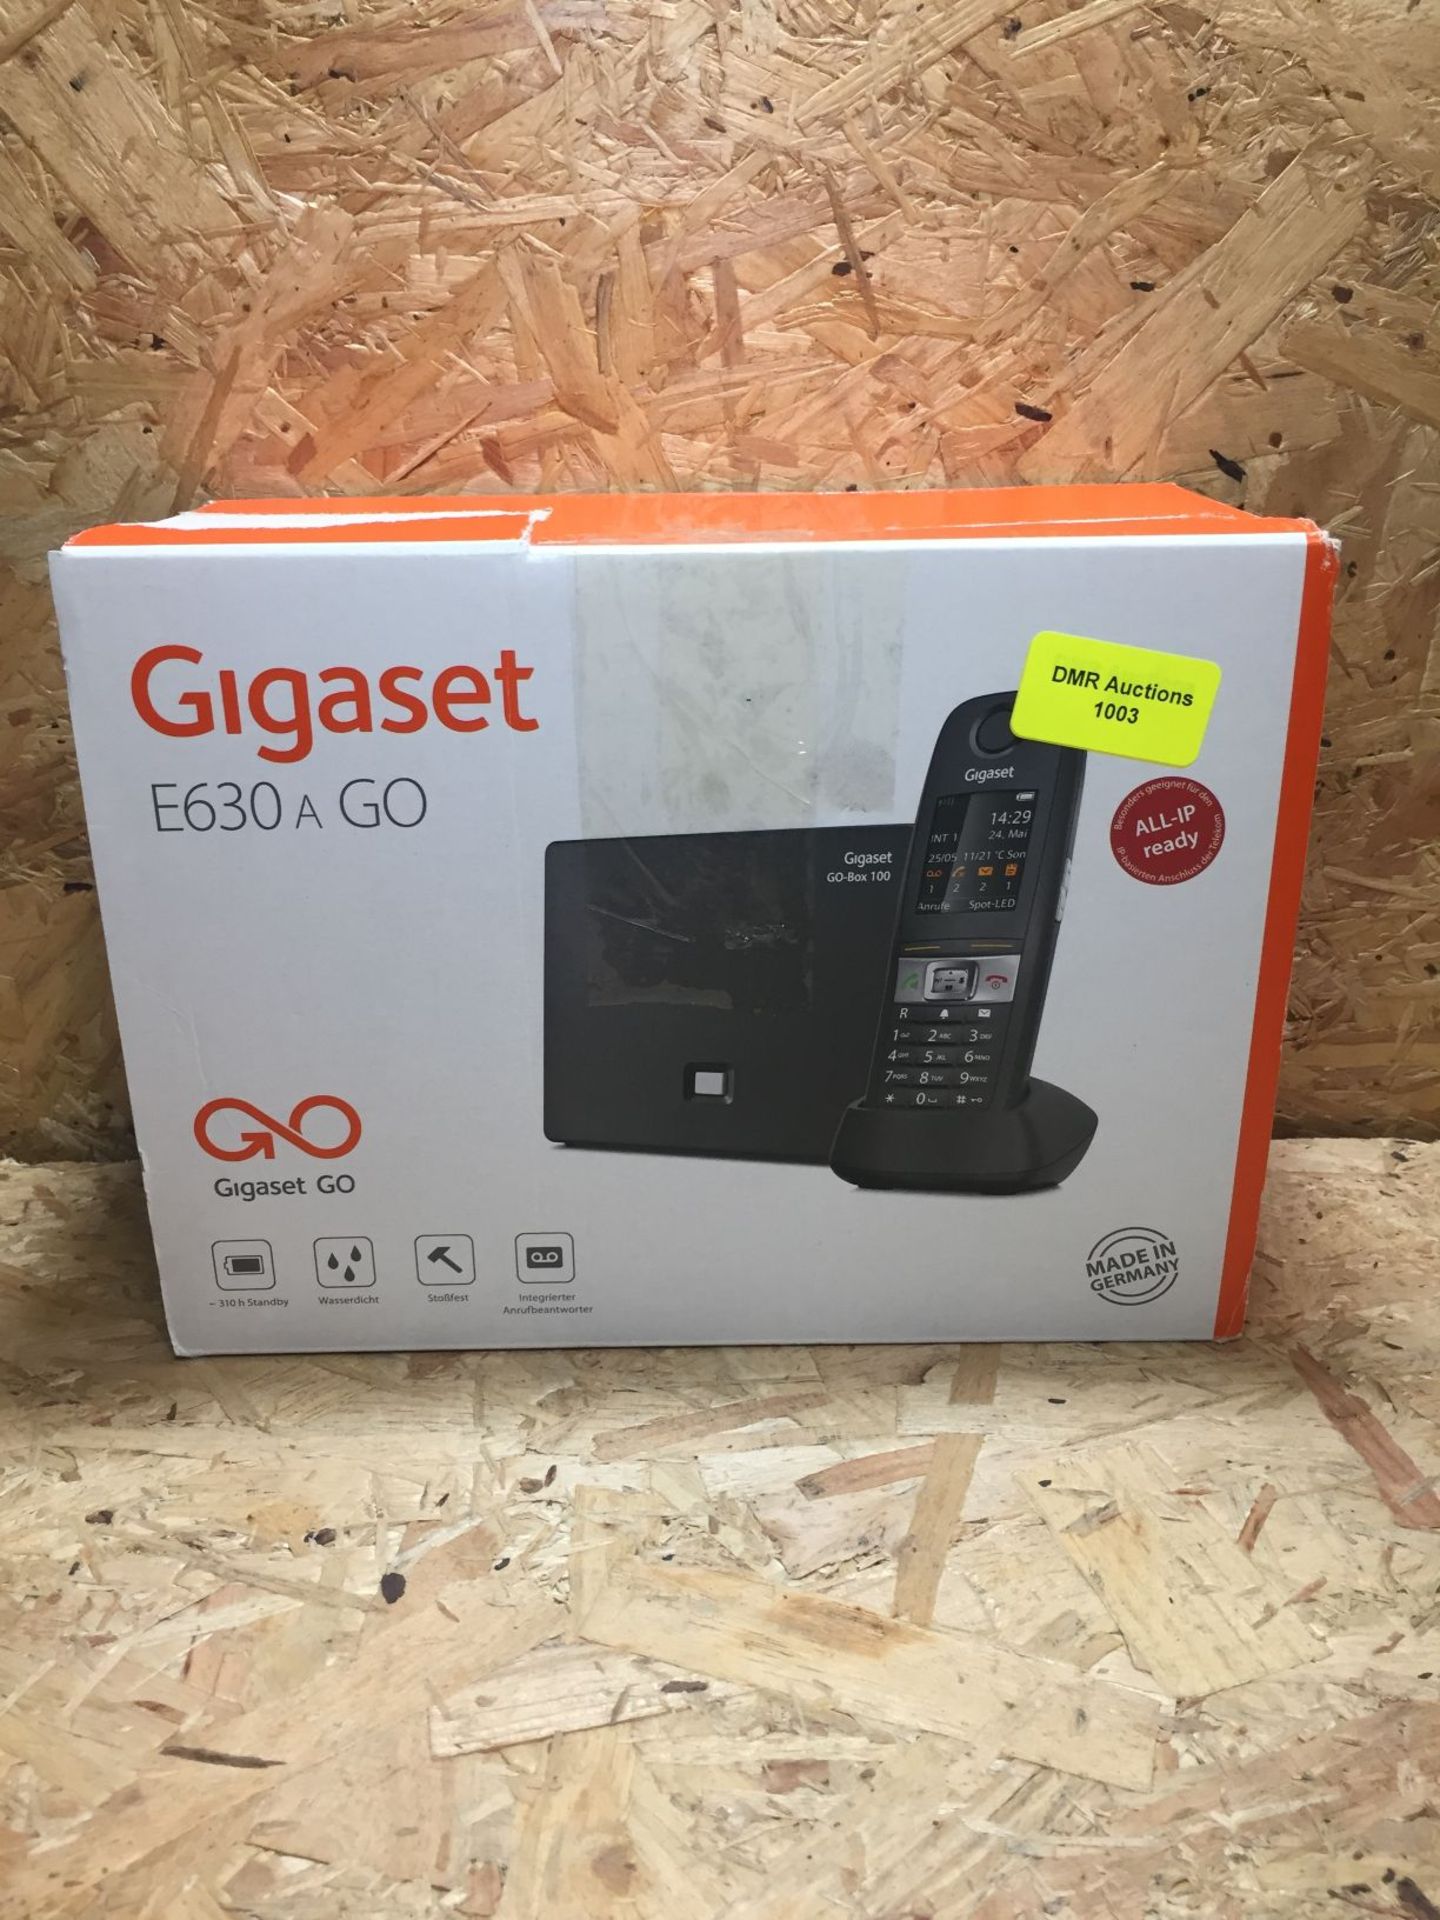 1 X GIGASET E630 A GO / RRP £99.99 - UNTESTED CUSTOMER RETURNS - APPRAISALS AVAILABLE ON REQUEST -